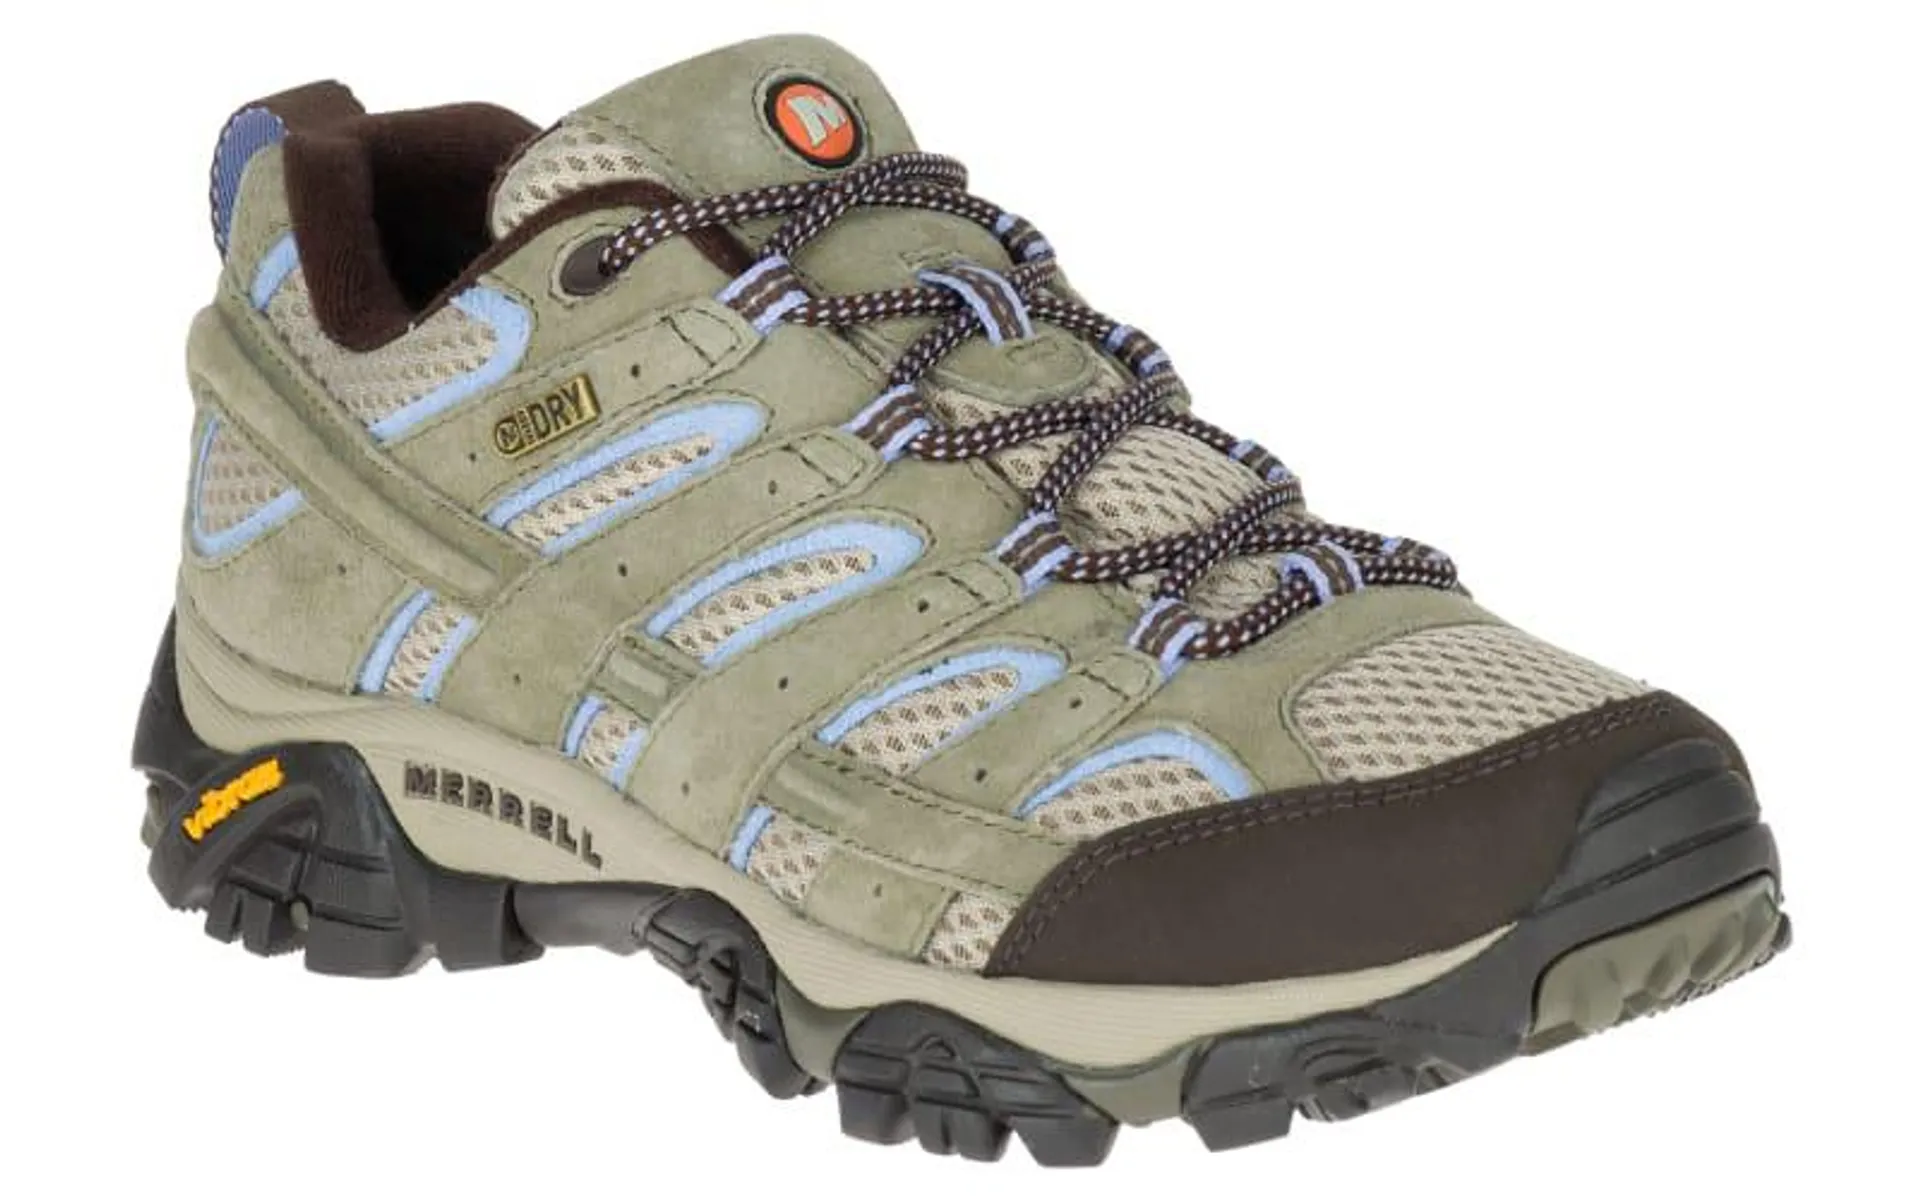 Merrell Moab 2 Waterproof Hiking Shoes for Ladies - Dusty Olive - 6M